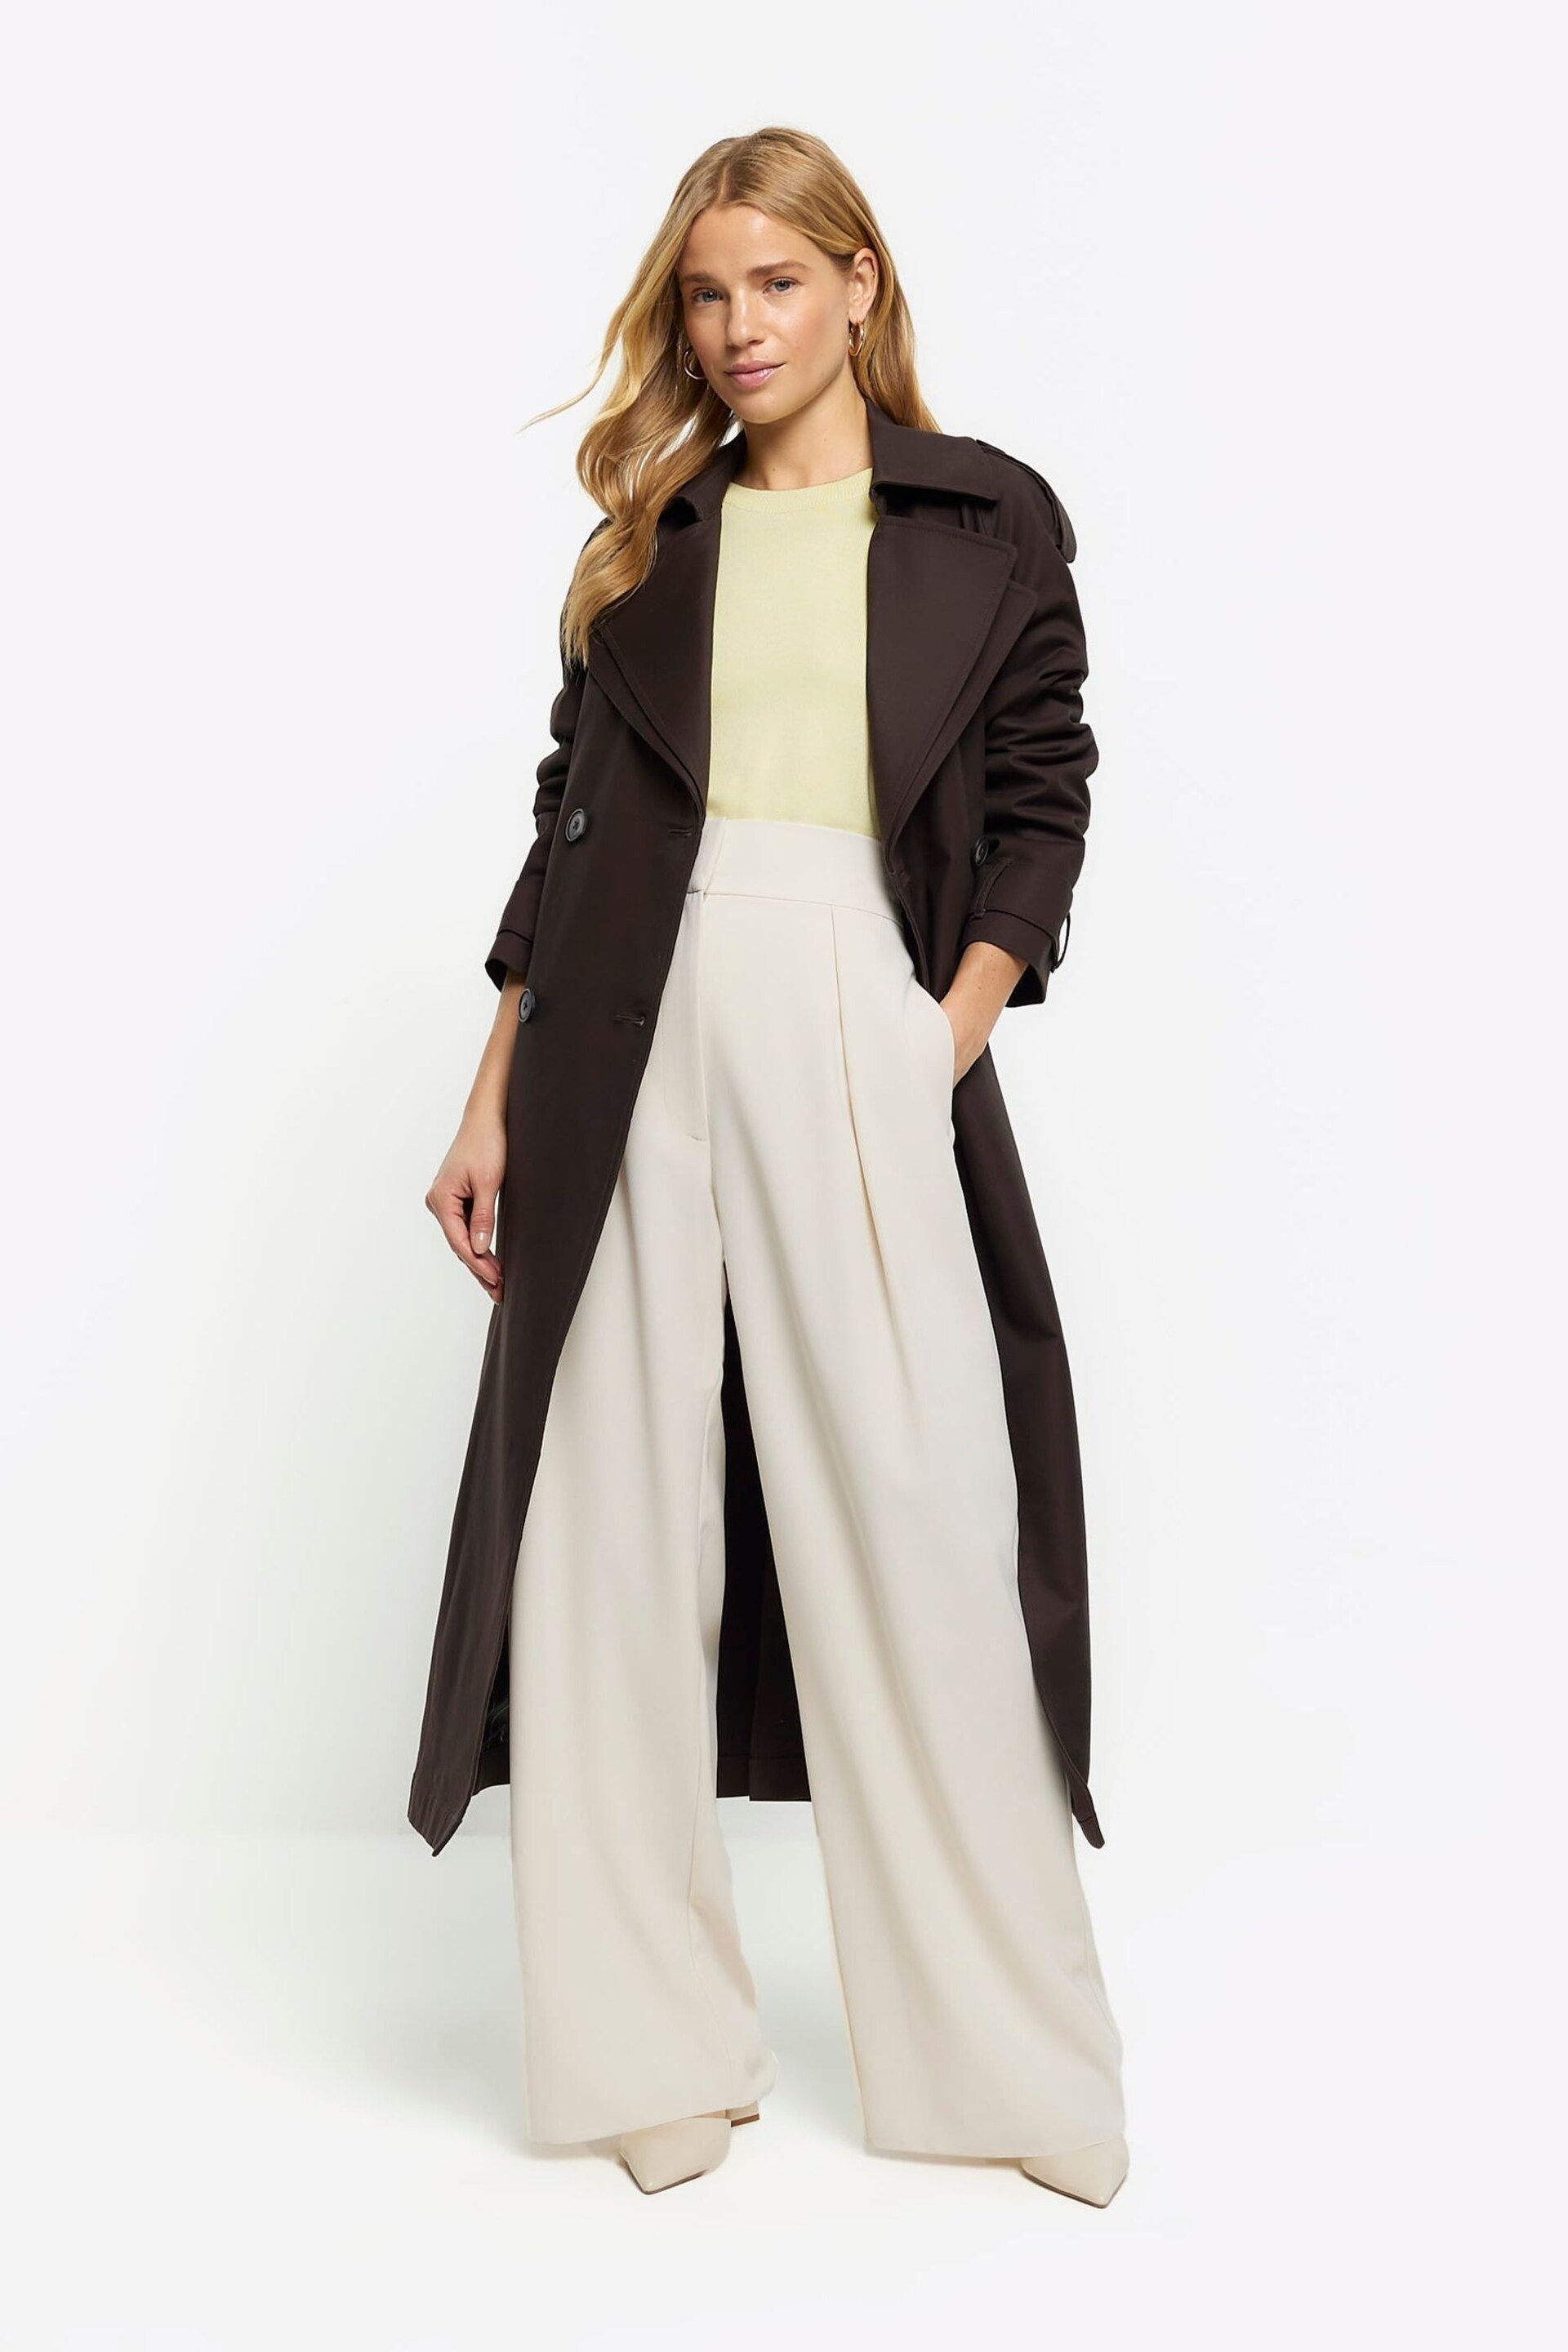 River Island Cream Wide Leg Pleated Clean Trousers - Image 3 of 6